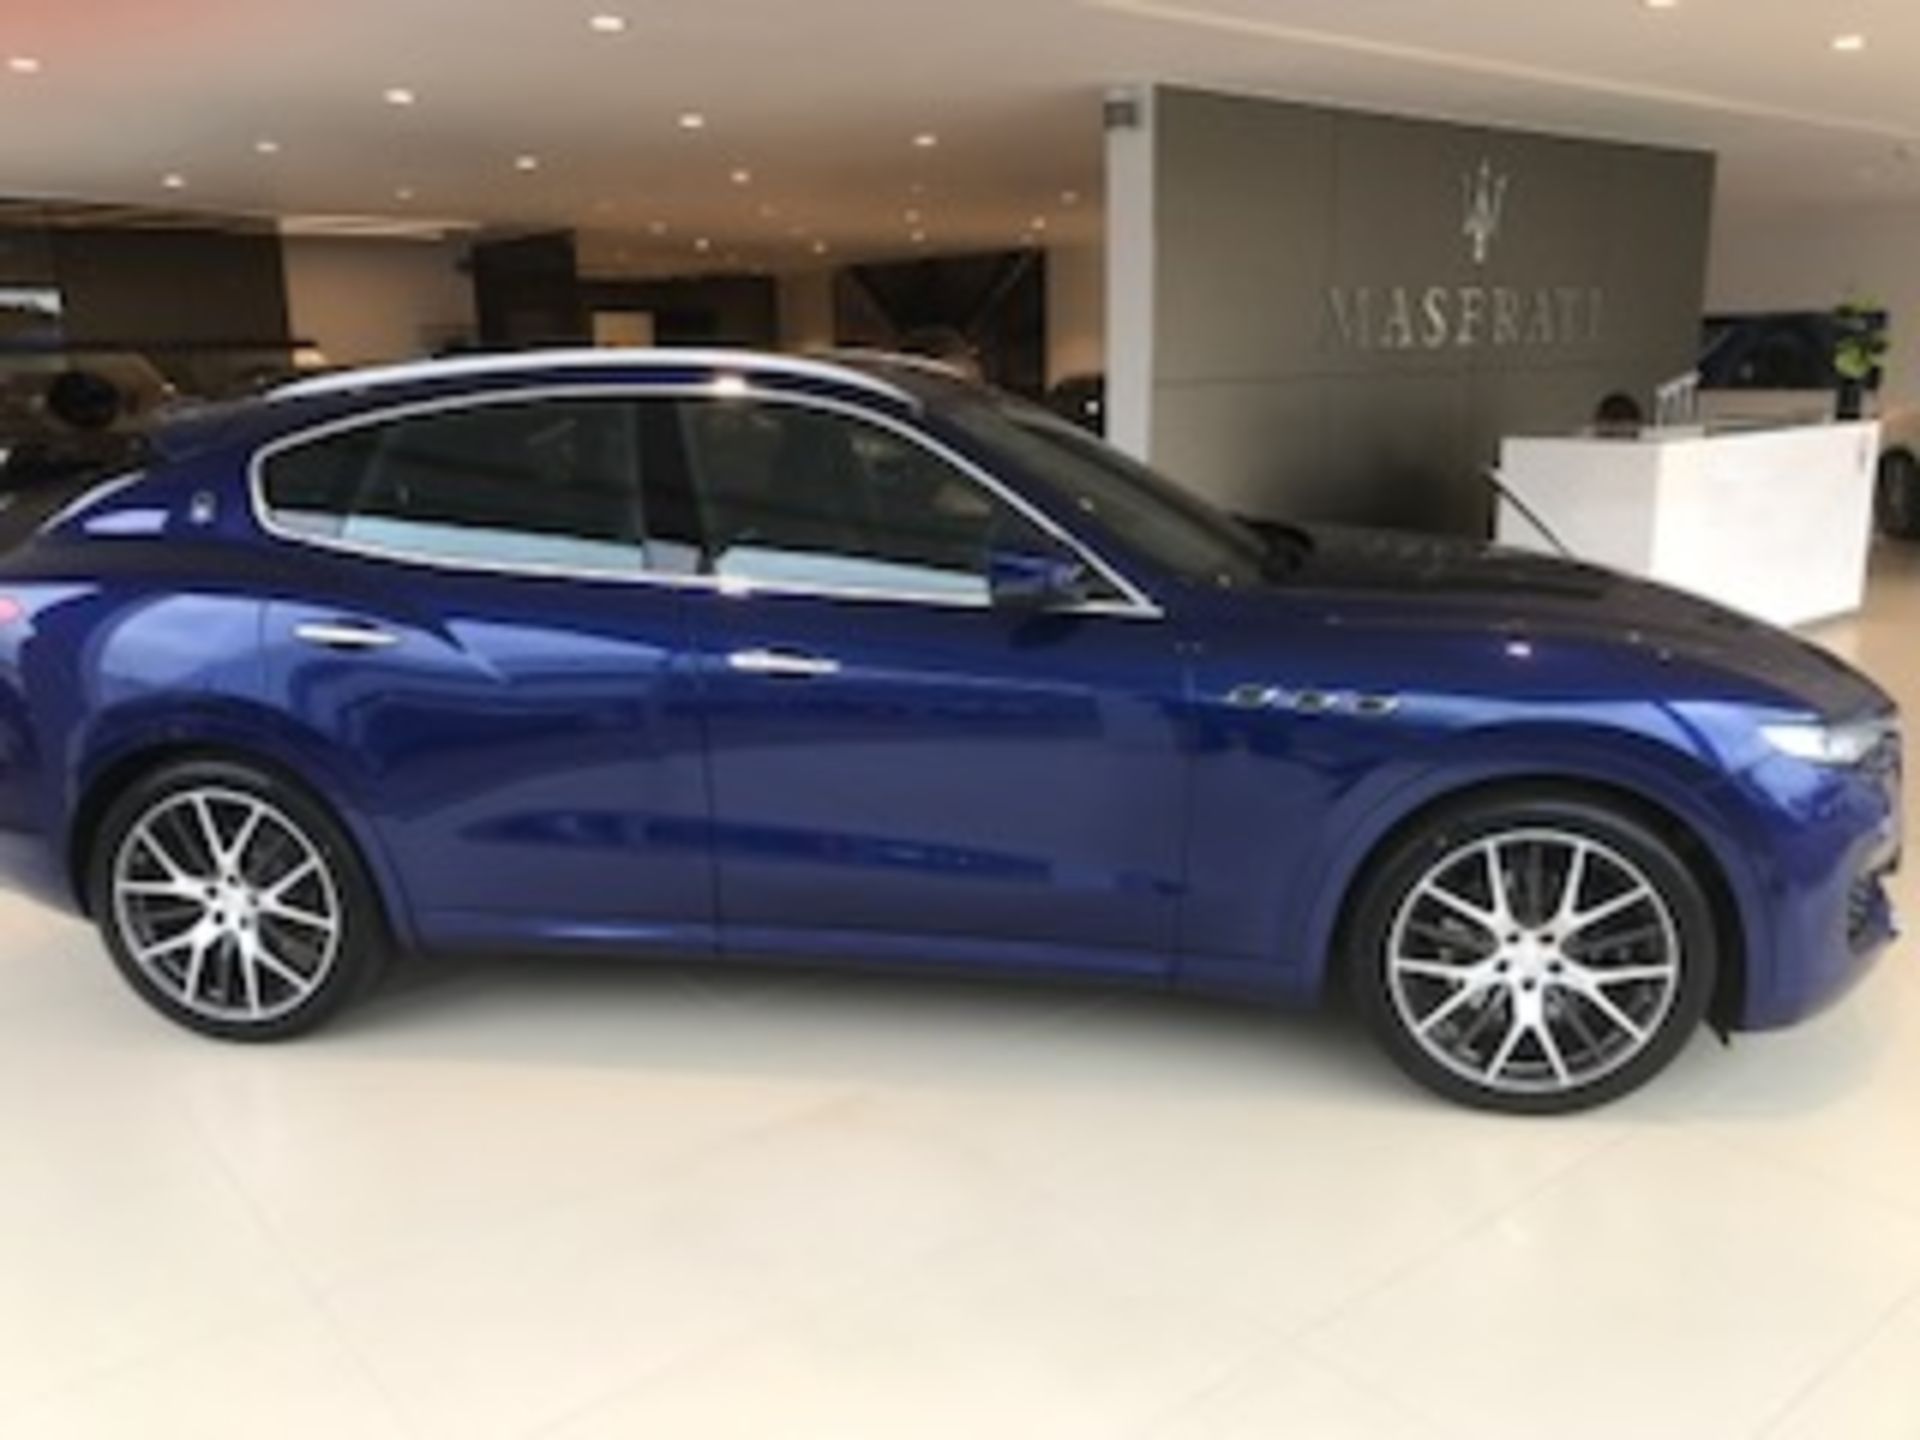 2017 Maserati Lavante 3L Turbo. 1 Owner From New. Low Mileage - Image 2 of 14